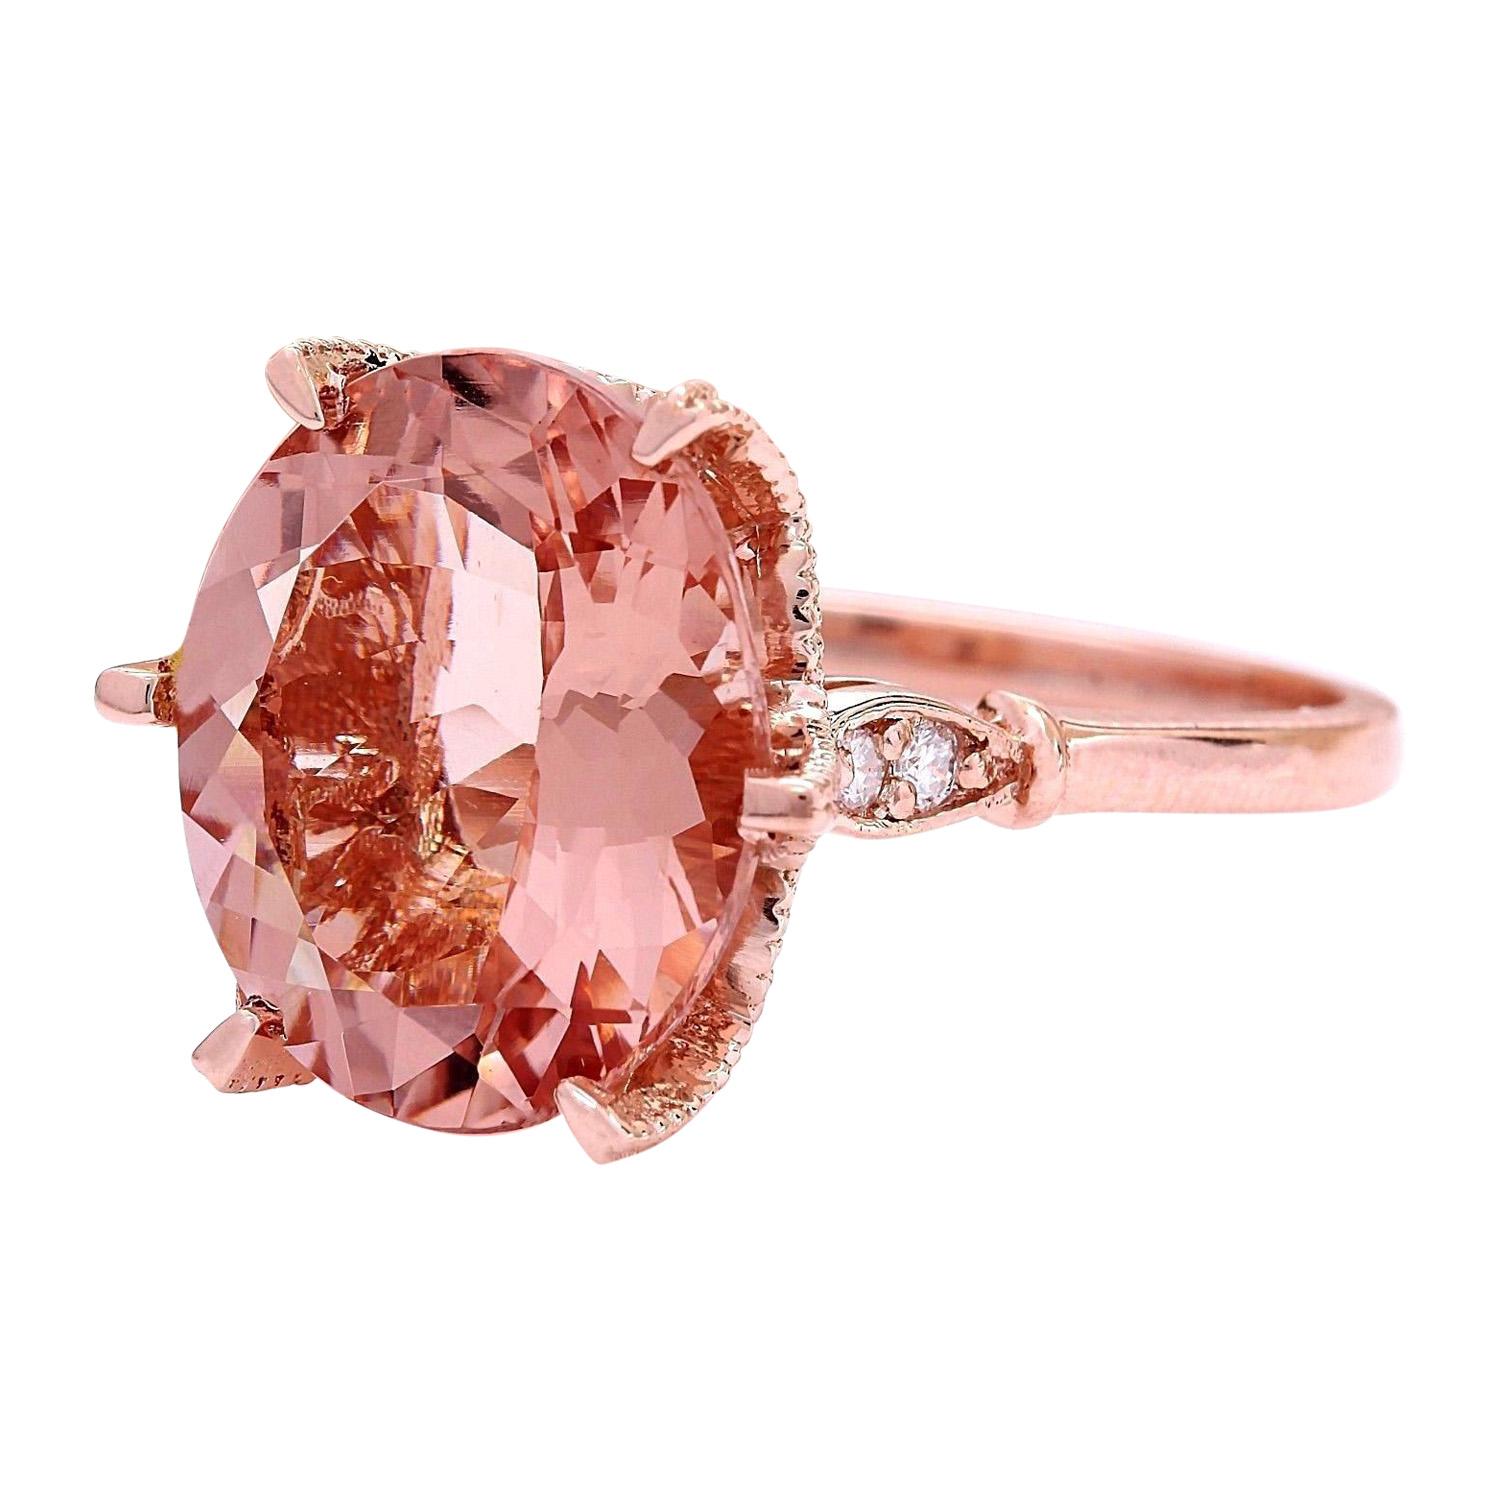 6.25 Carat Natural Morganite 14K Solid Rose Gold Diamond Ring
 Item Type: Ring
 Item Style: Cocktail
 Material: 14K Rose Gold
 Mainstone: Morganite
 Stone Color: Peach
 Stone Weight: 6.15 Carat
 Stone Shape: Oval
 Stone Quantity: 1
 Stone